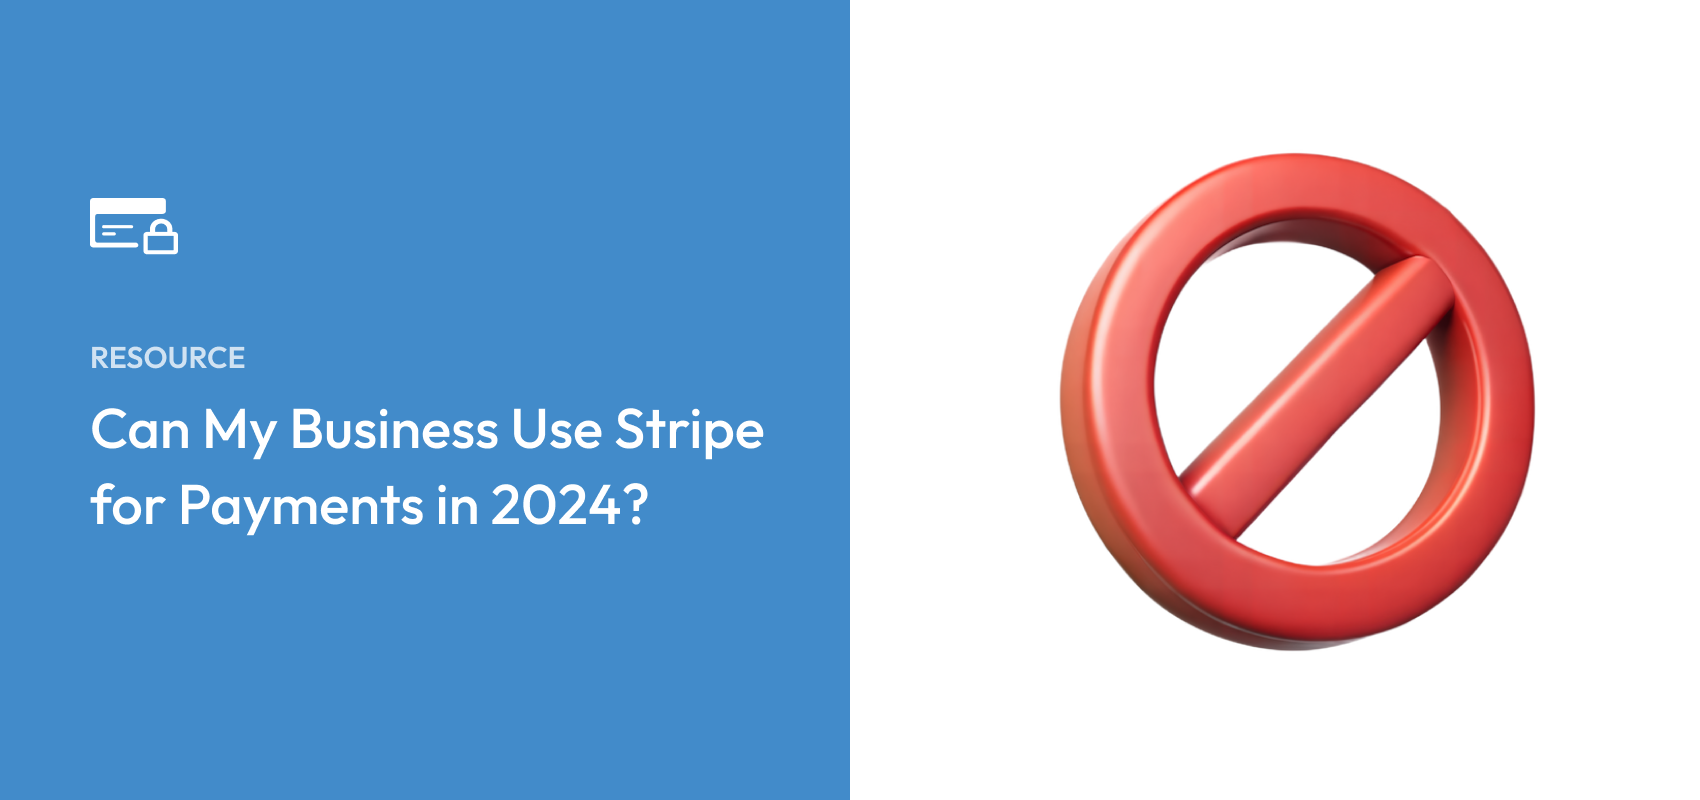 Can My Business Use Stripe for Payments in 2024?